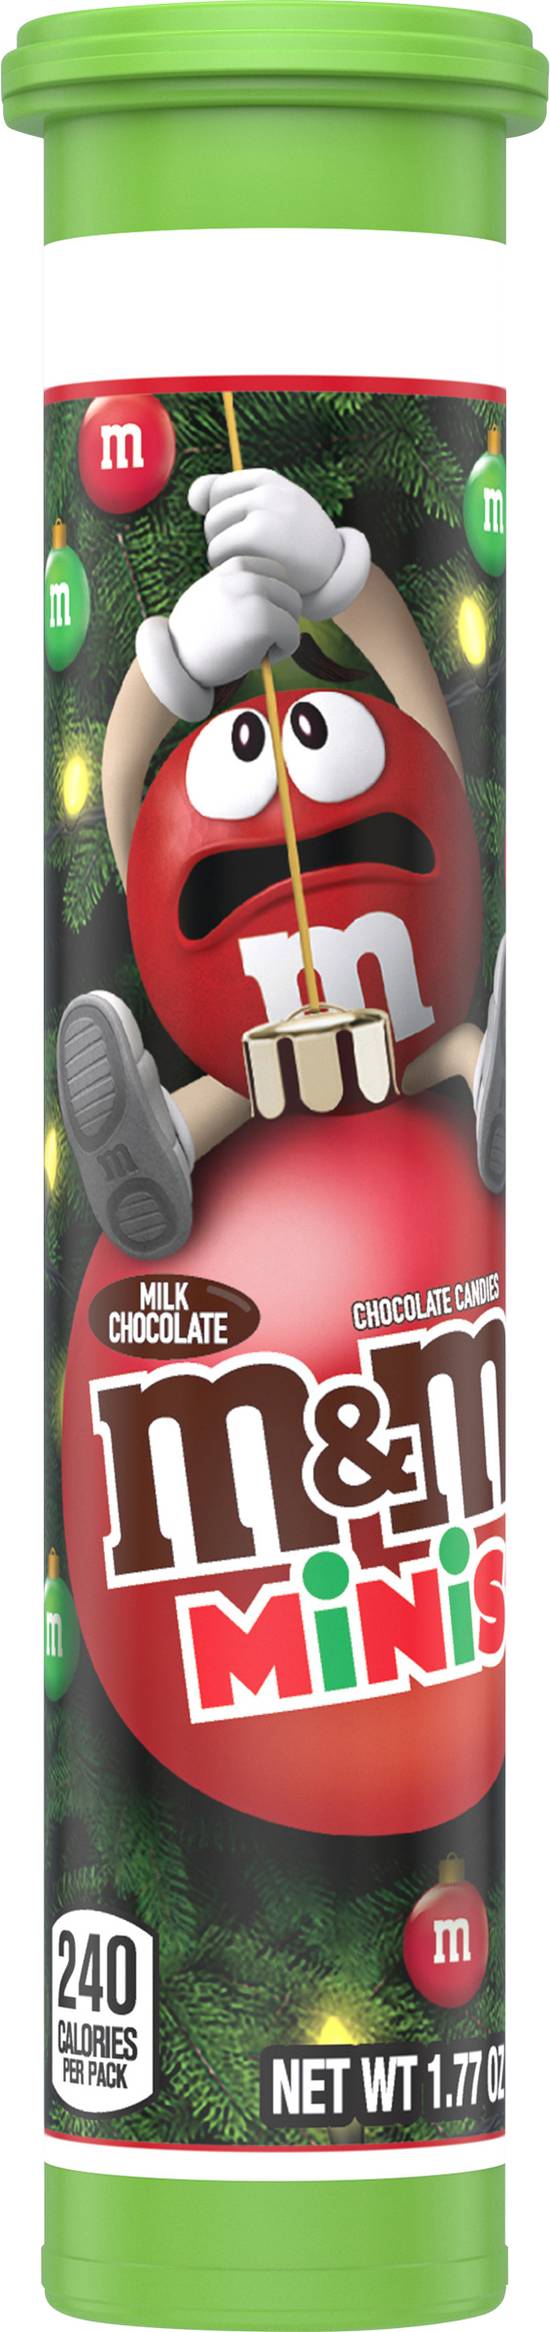 M&M's Minis Milk Chocolate Christmas Candies (1.8 oz), Delivery Near You